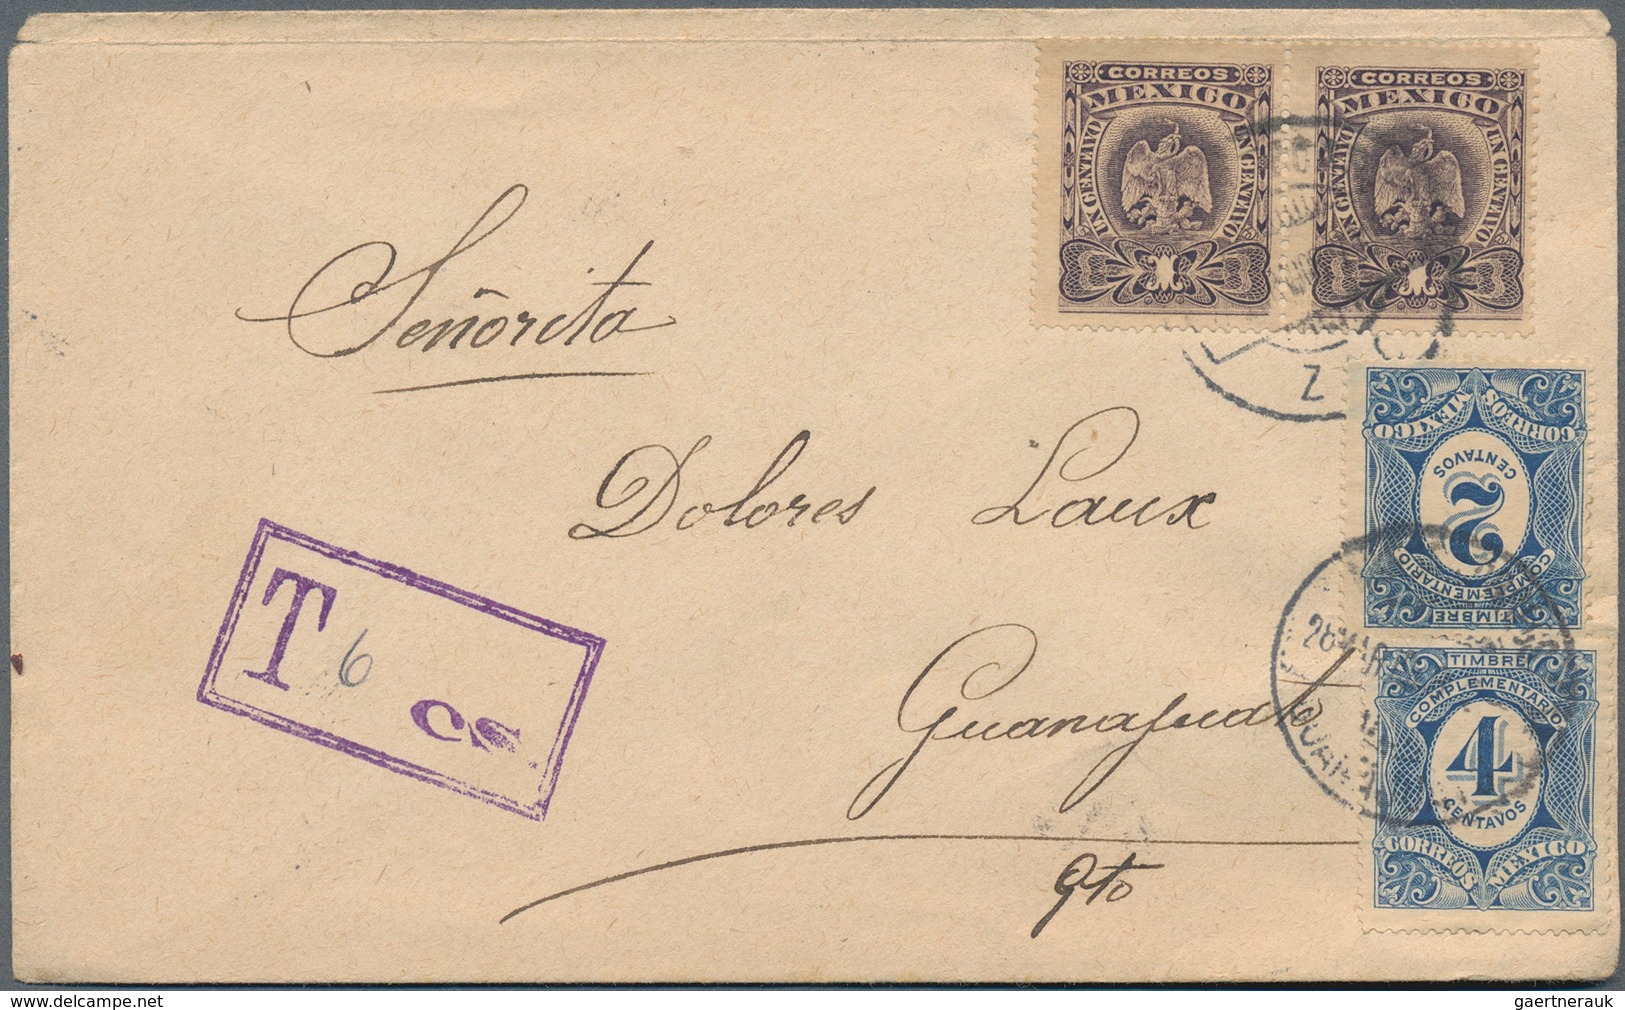 Mexiko: 1900's-1920's: 59 Covers And Postal Stationery Items, Mostly Used Inland From A Corresponden - México